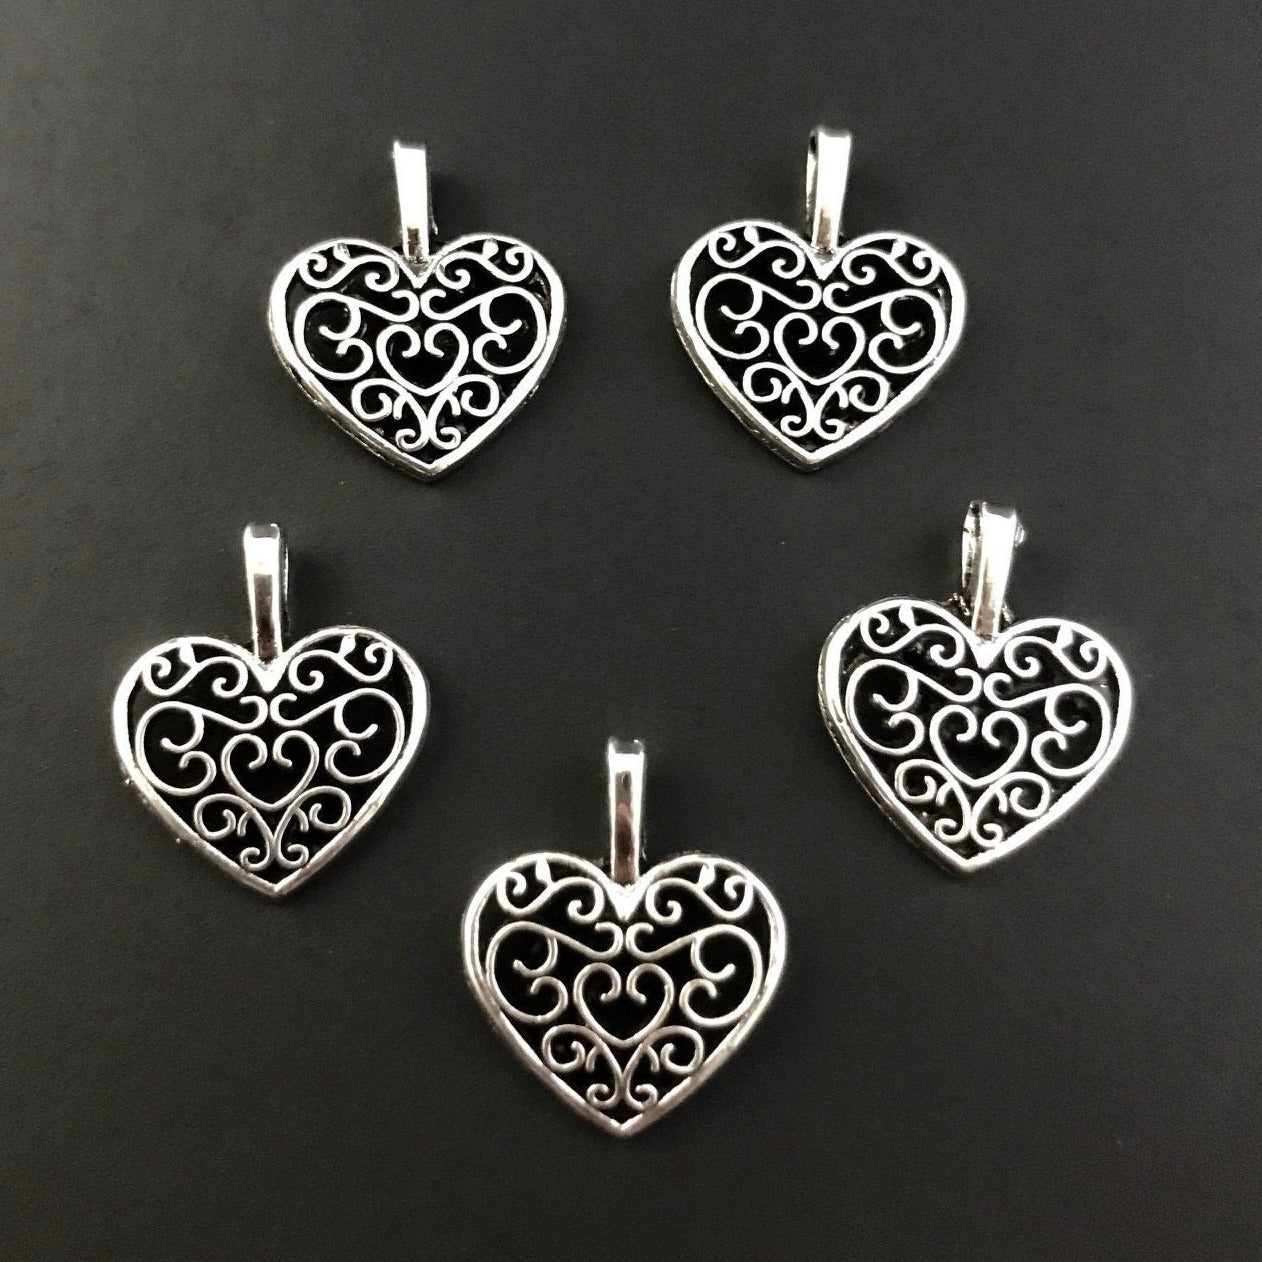 Lovely Heart Charms - Antique Silver